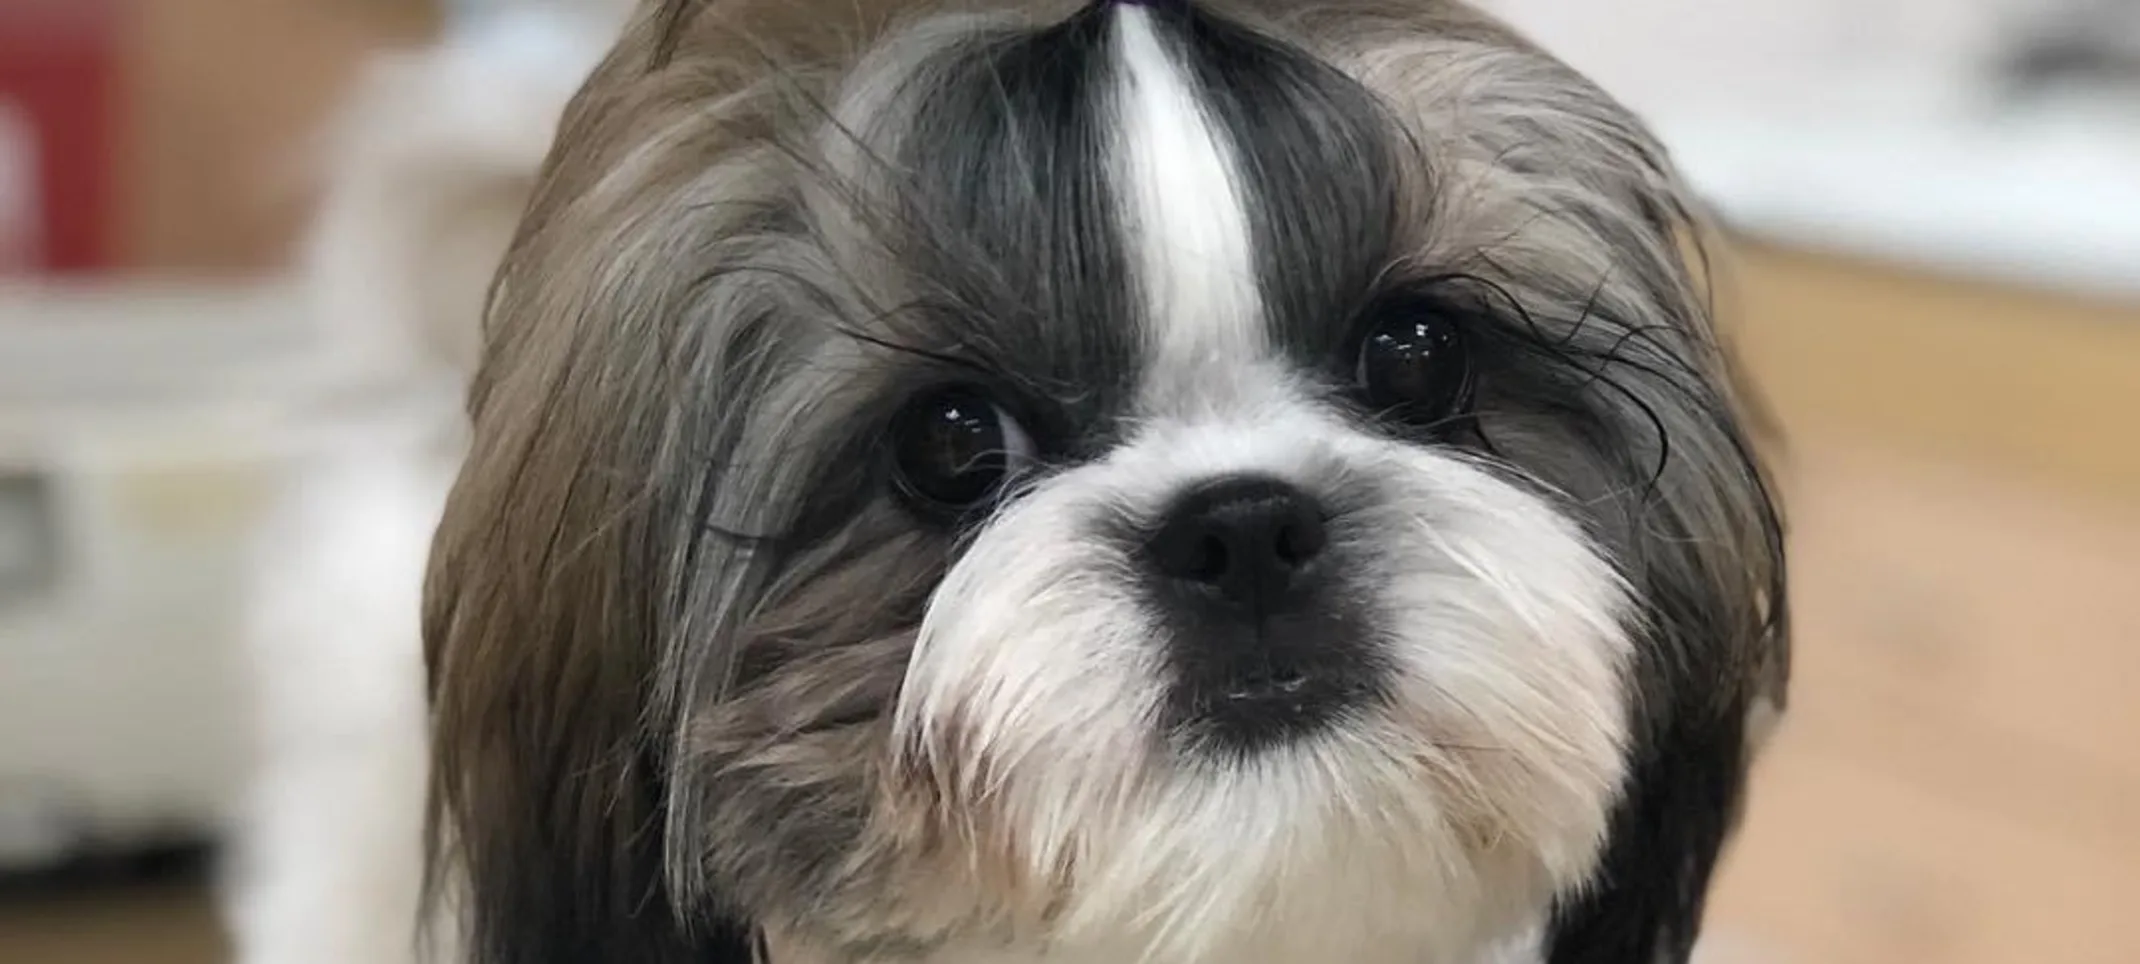 Close up image of a dog with groomed fur